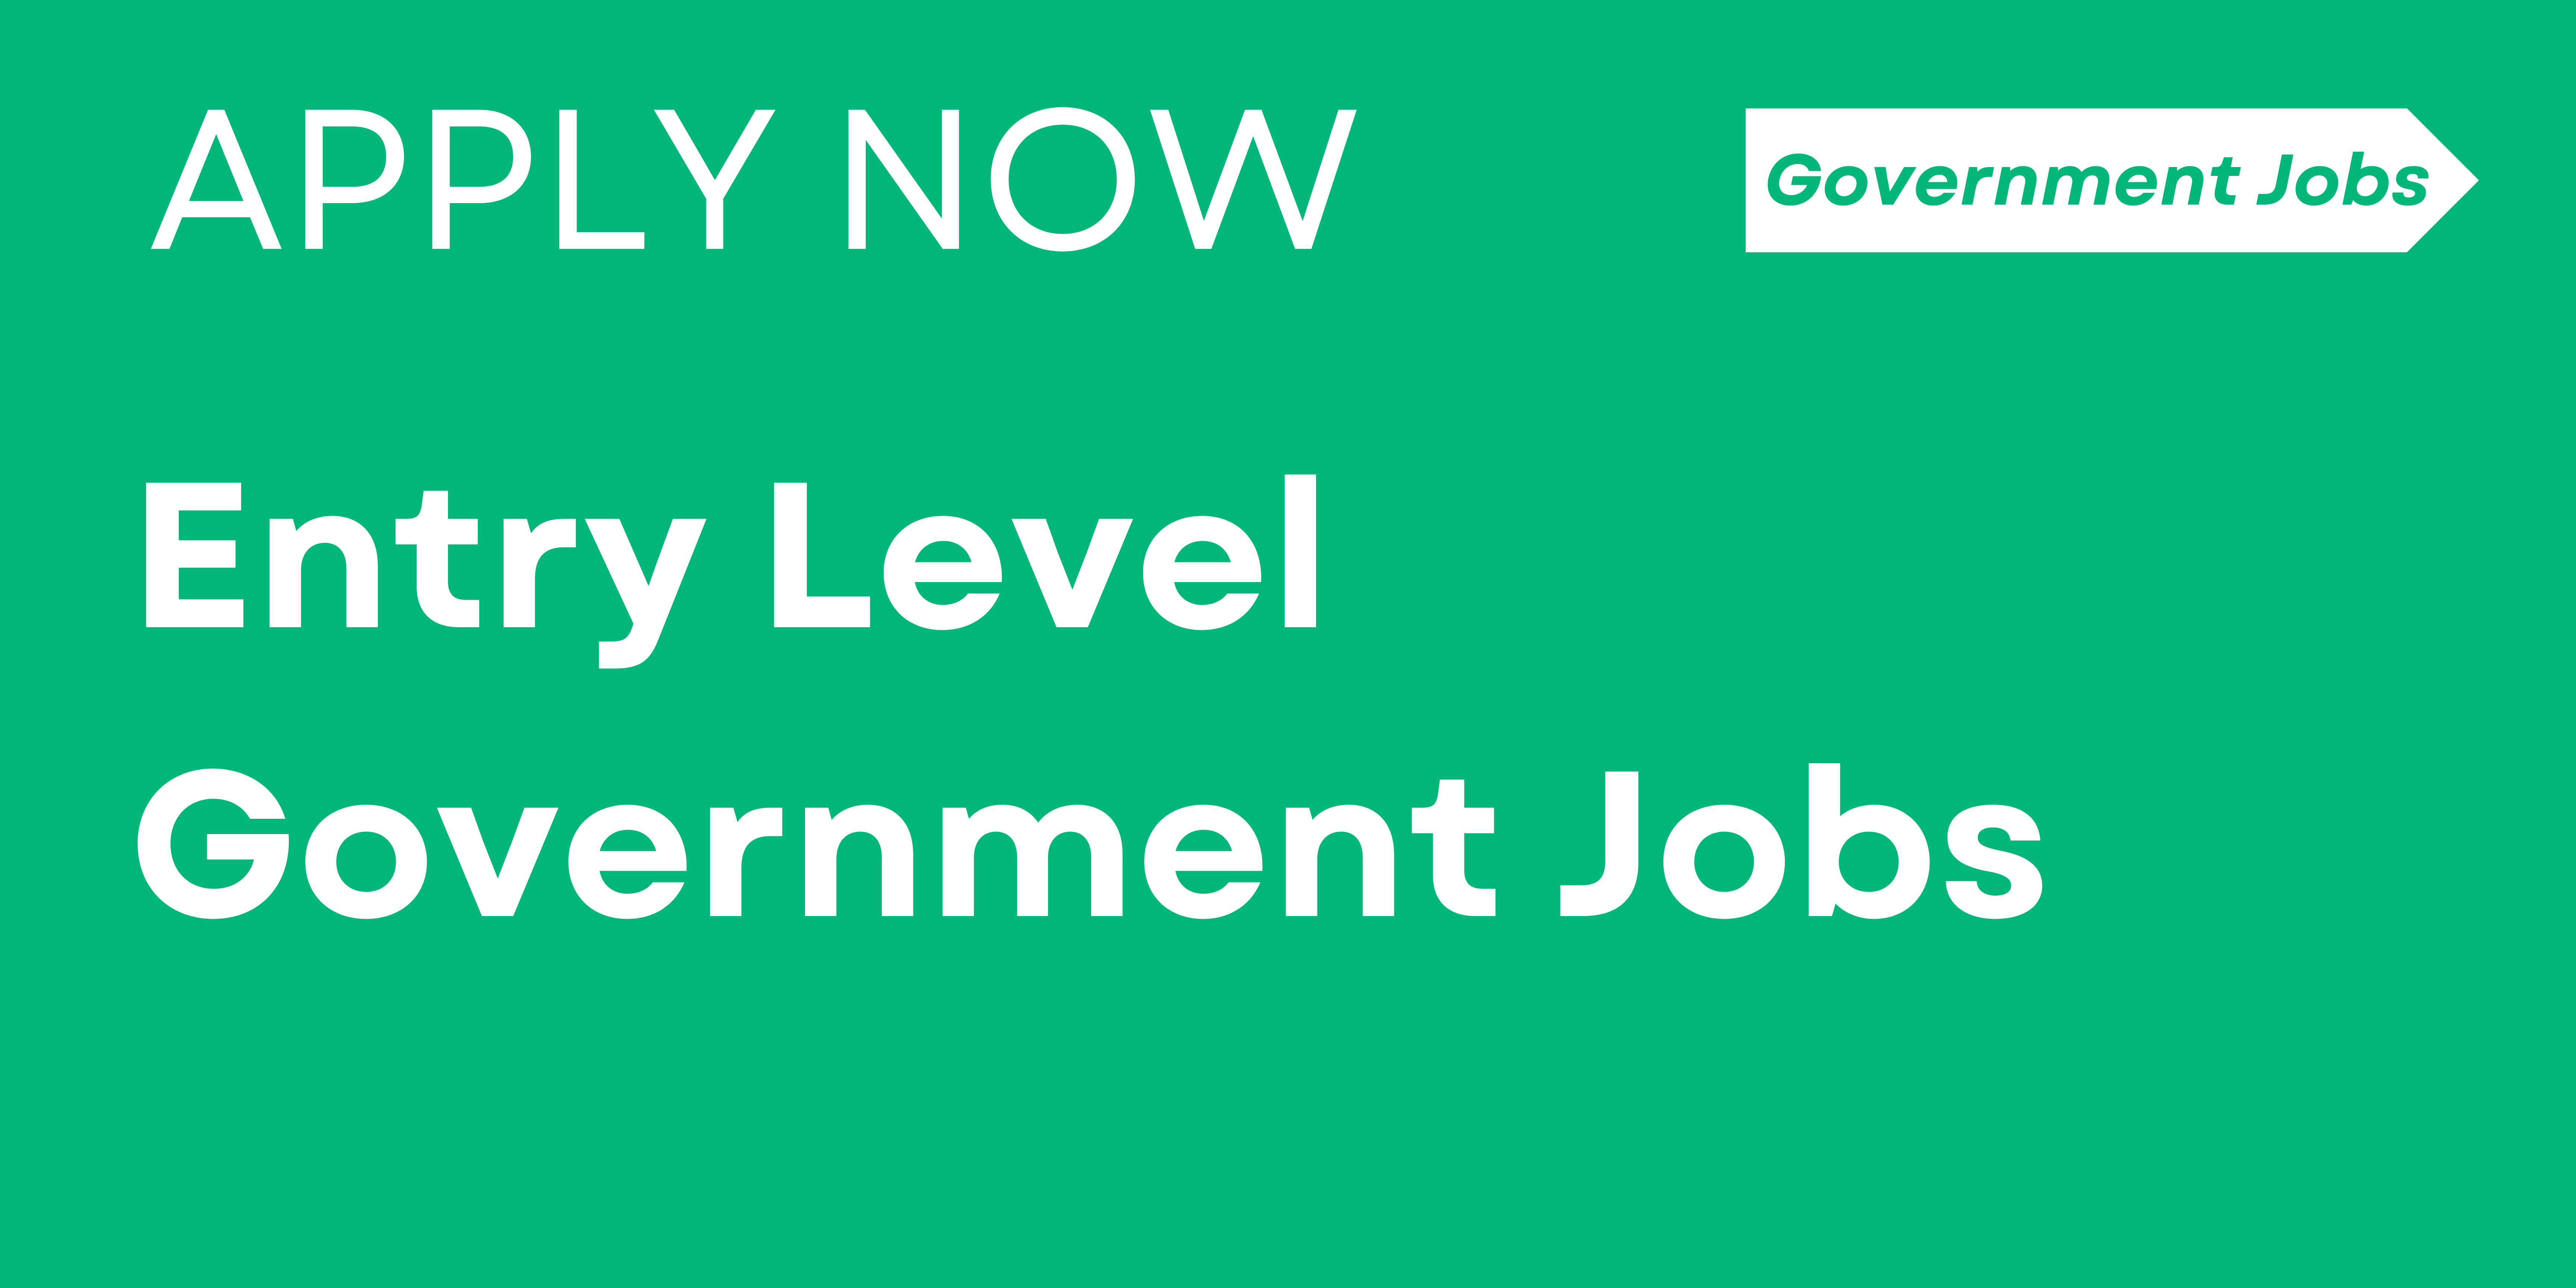 Entry Level Government Jobs